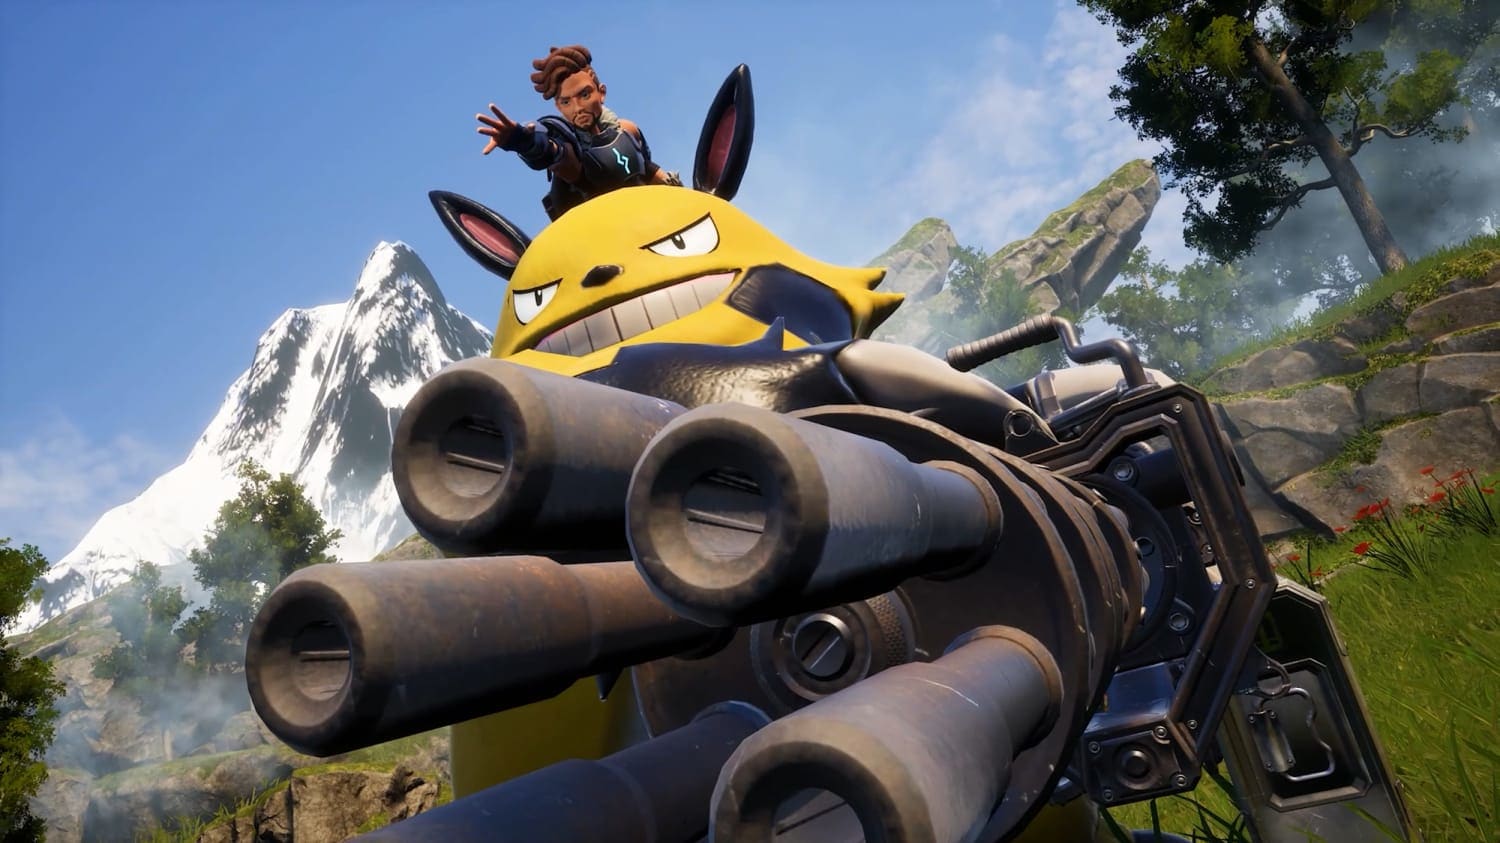 Palworld cinematic screenshot showing a fantasy creature armed with a gatling gun.